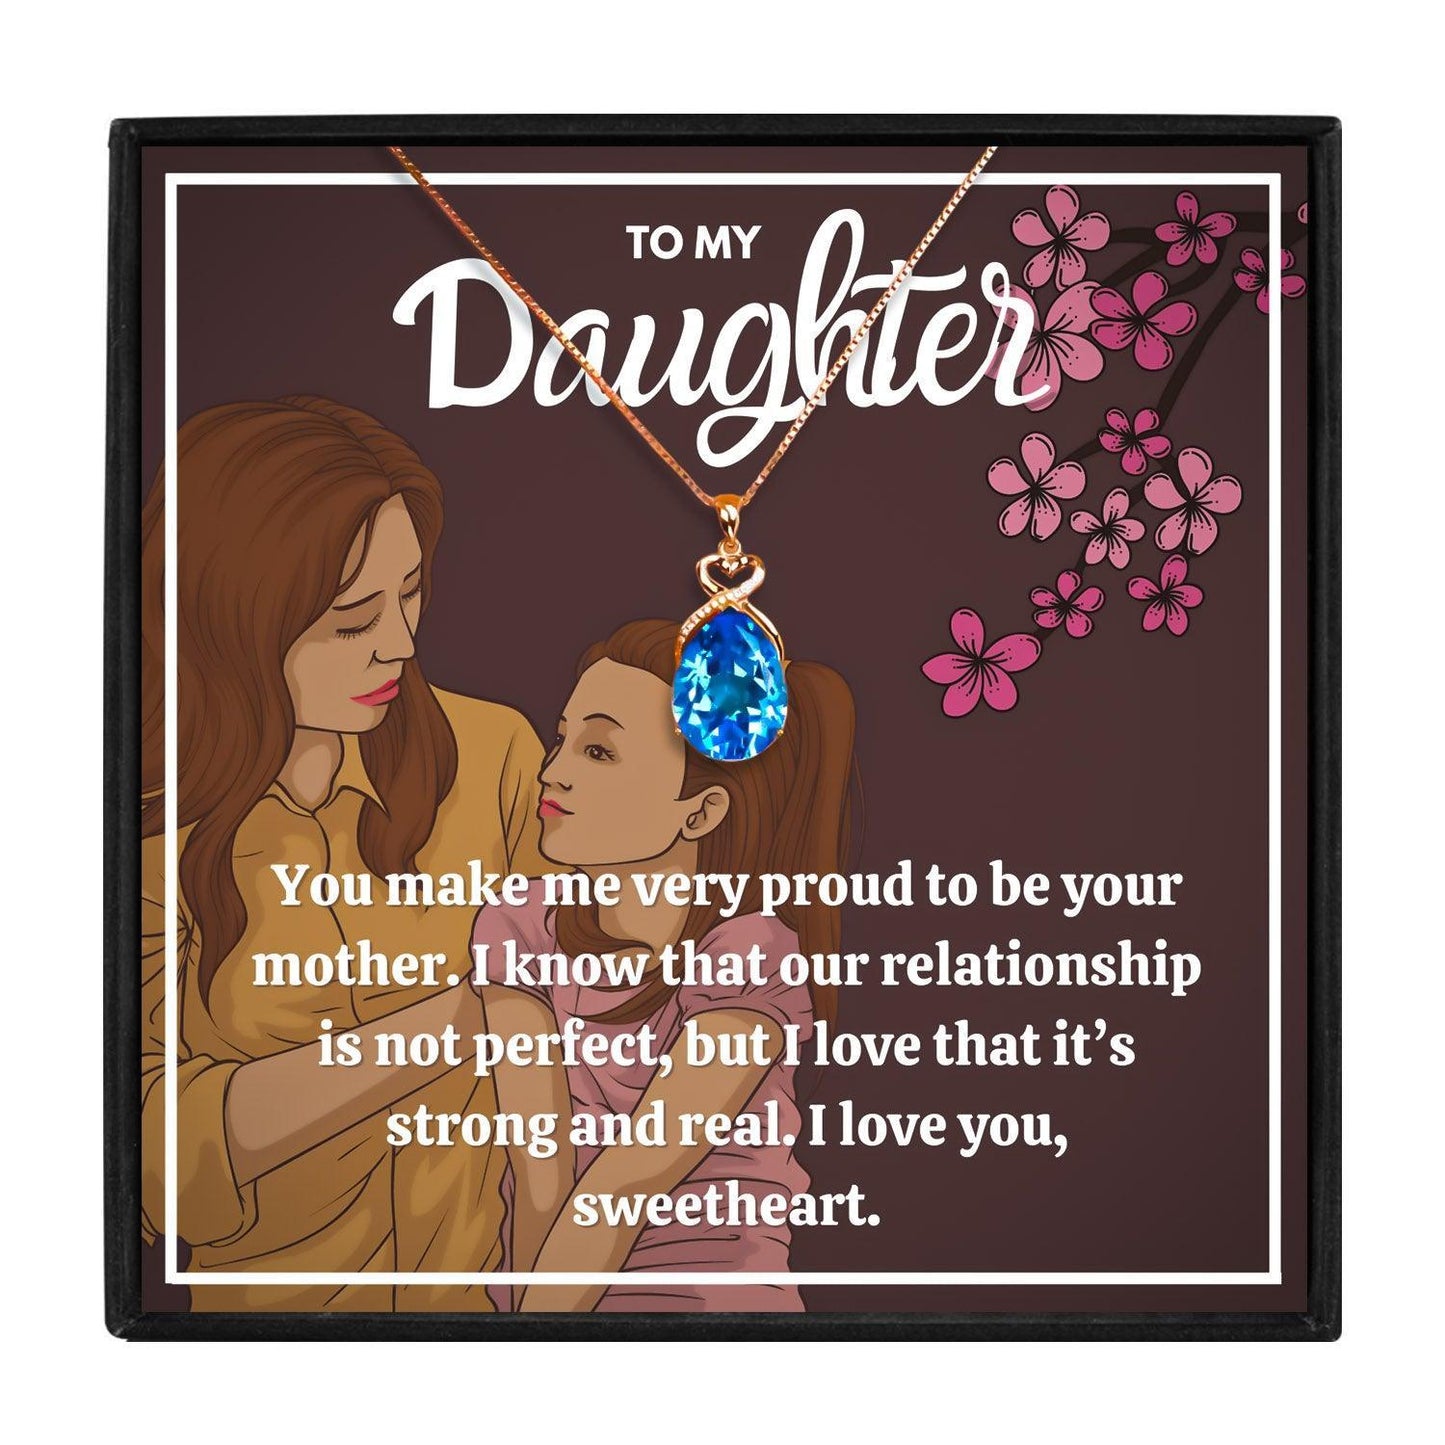 Adorable Mother & Daughter Gift Jewelry Set in 2023 | Adorable Mother & Daughter Gift Jewelry Set - undefined | Mother Daughter, Mother Daughter Gift Necklace, Mother Daughter Infinity Necklace, Mother Daughter Interlocking Circle Necklace Gift Set, Mother Daughter Necklace, Mother Daughter Wedding Gift | From Hunny Life | hunnylife.com